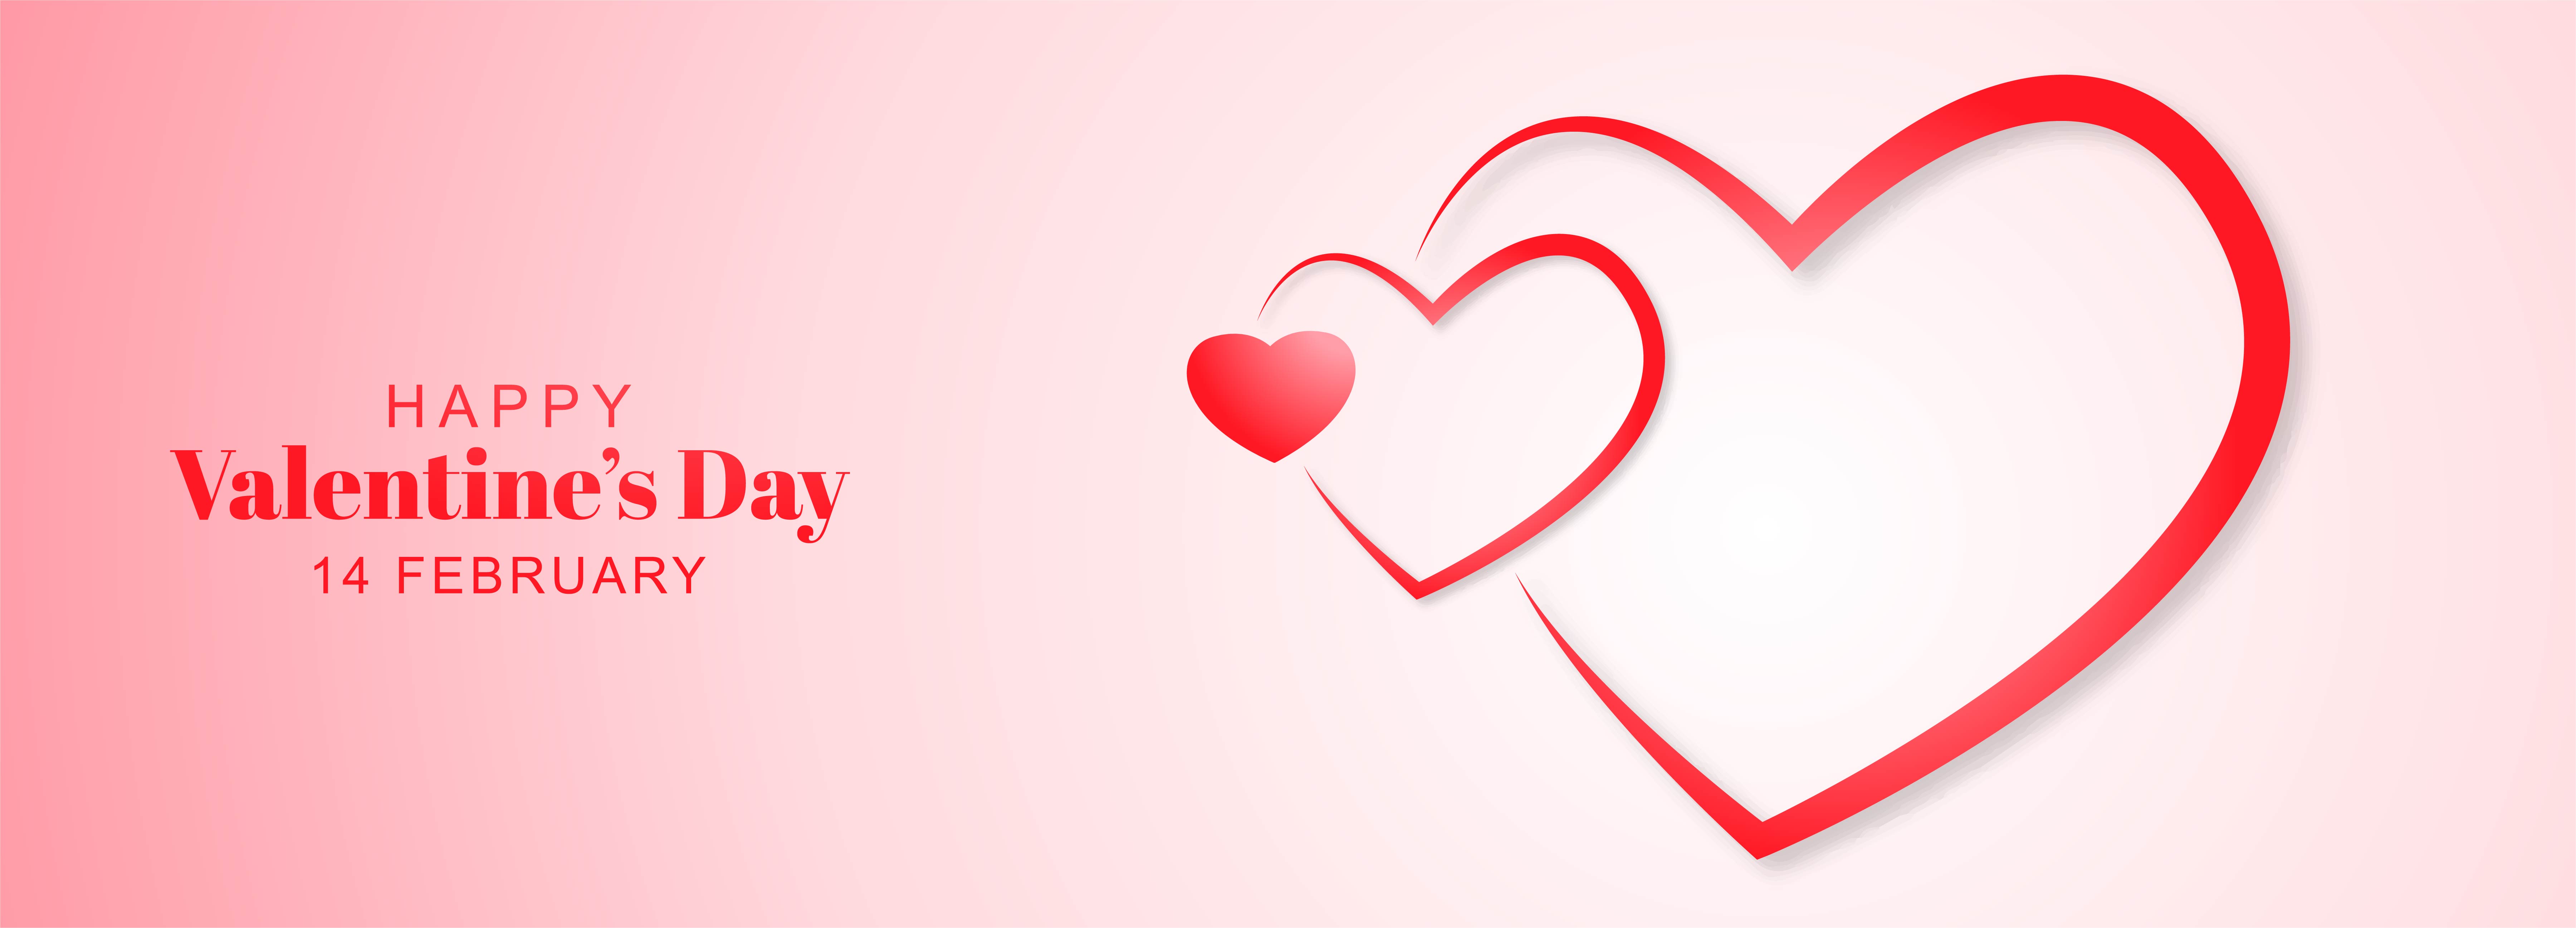 Beautiful Outline Hearts Valentines Day Banner Download Free Vectors Clipart Graphics Vector Art